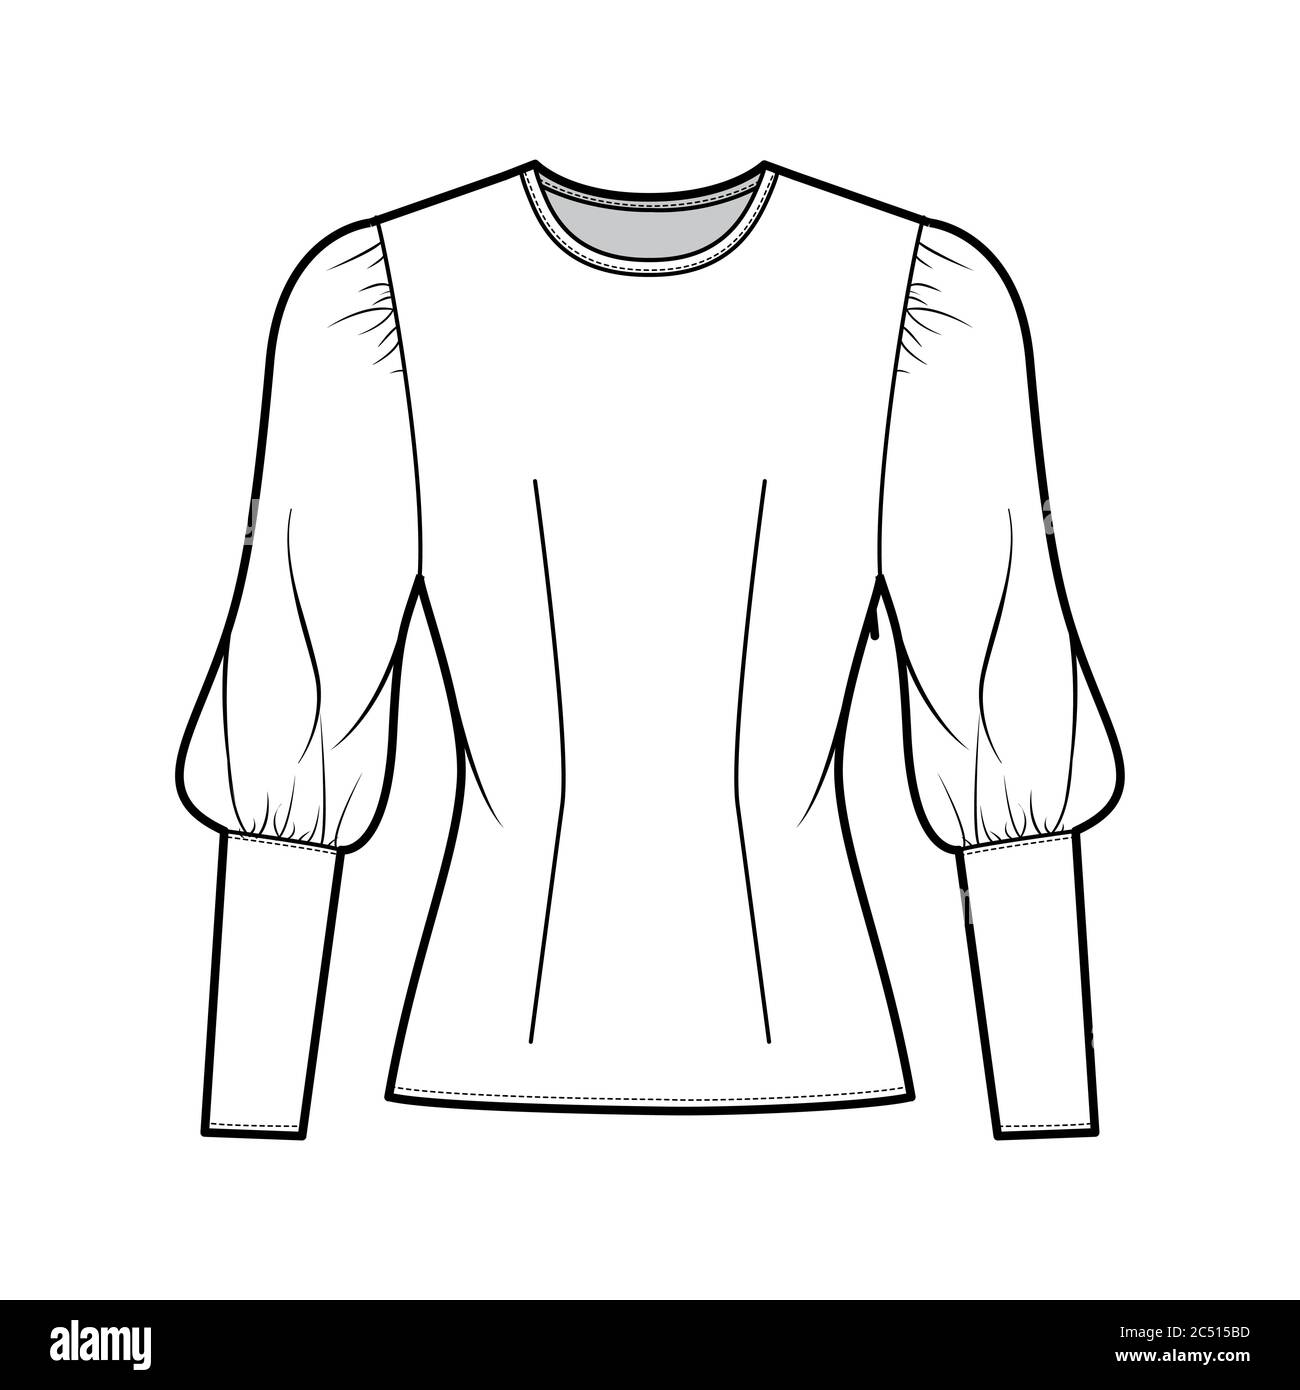 Blouse technical fashion illustration with round neckline, puffy mutton sleeves, fitted body, side zip fastening. Flat apparel template front white color. Women, men unisex CAD garment designer mockup Stock Vector